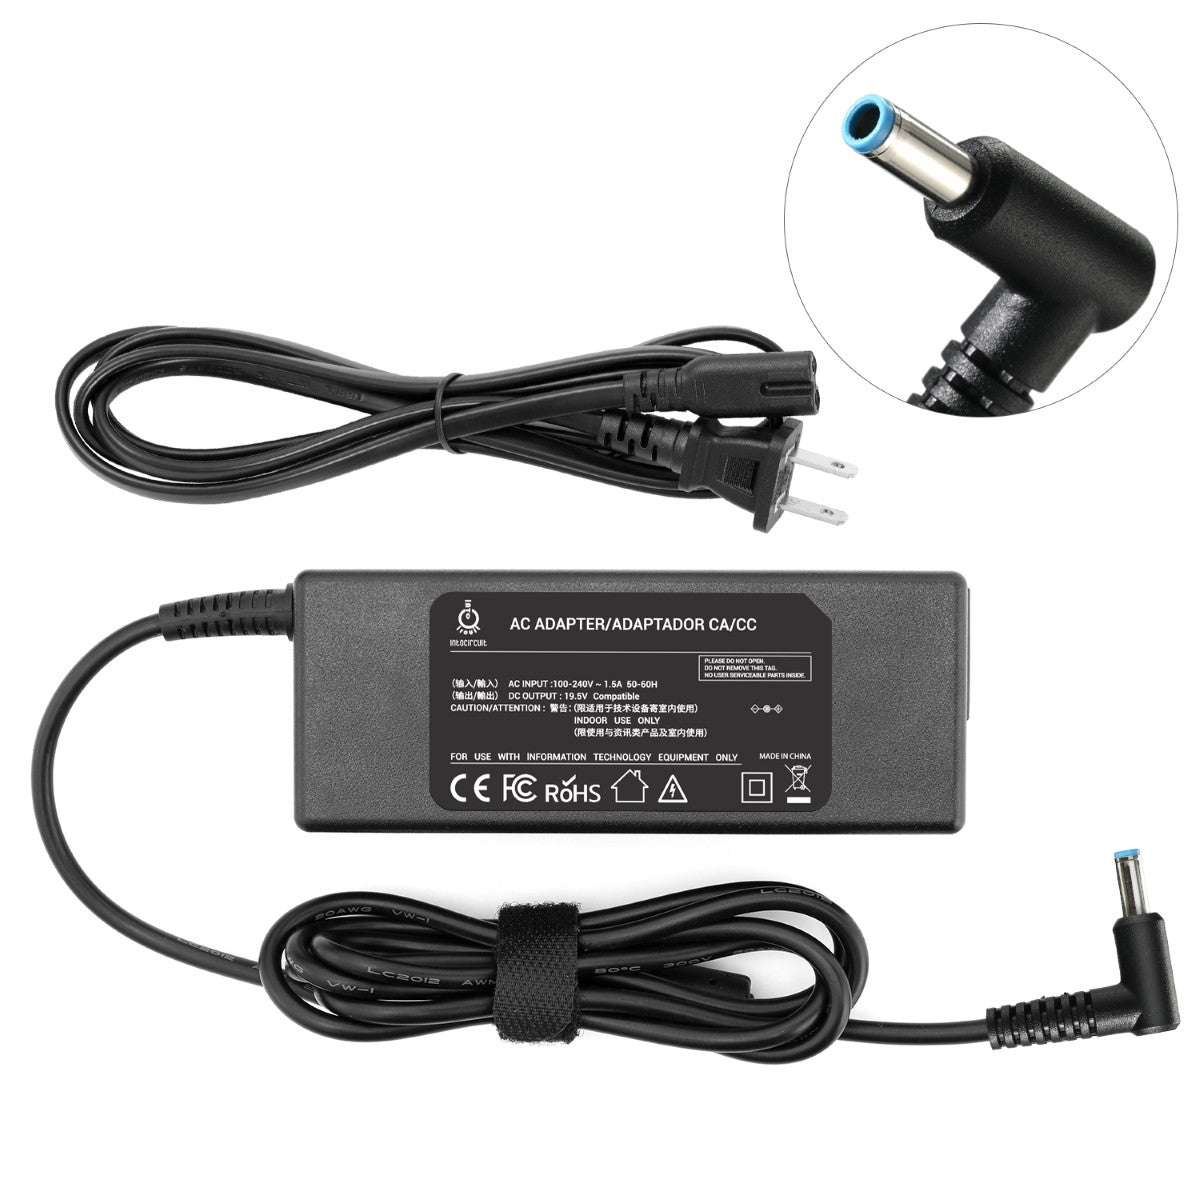 AC Adapter Charger for HP Pavilion 11-h110nr x2 Notebook